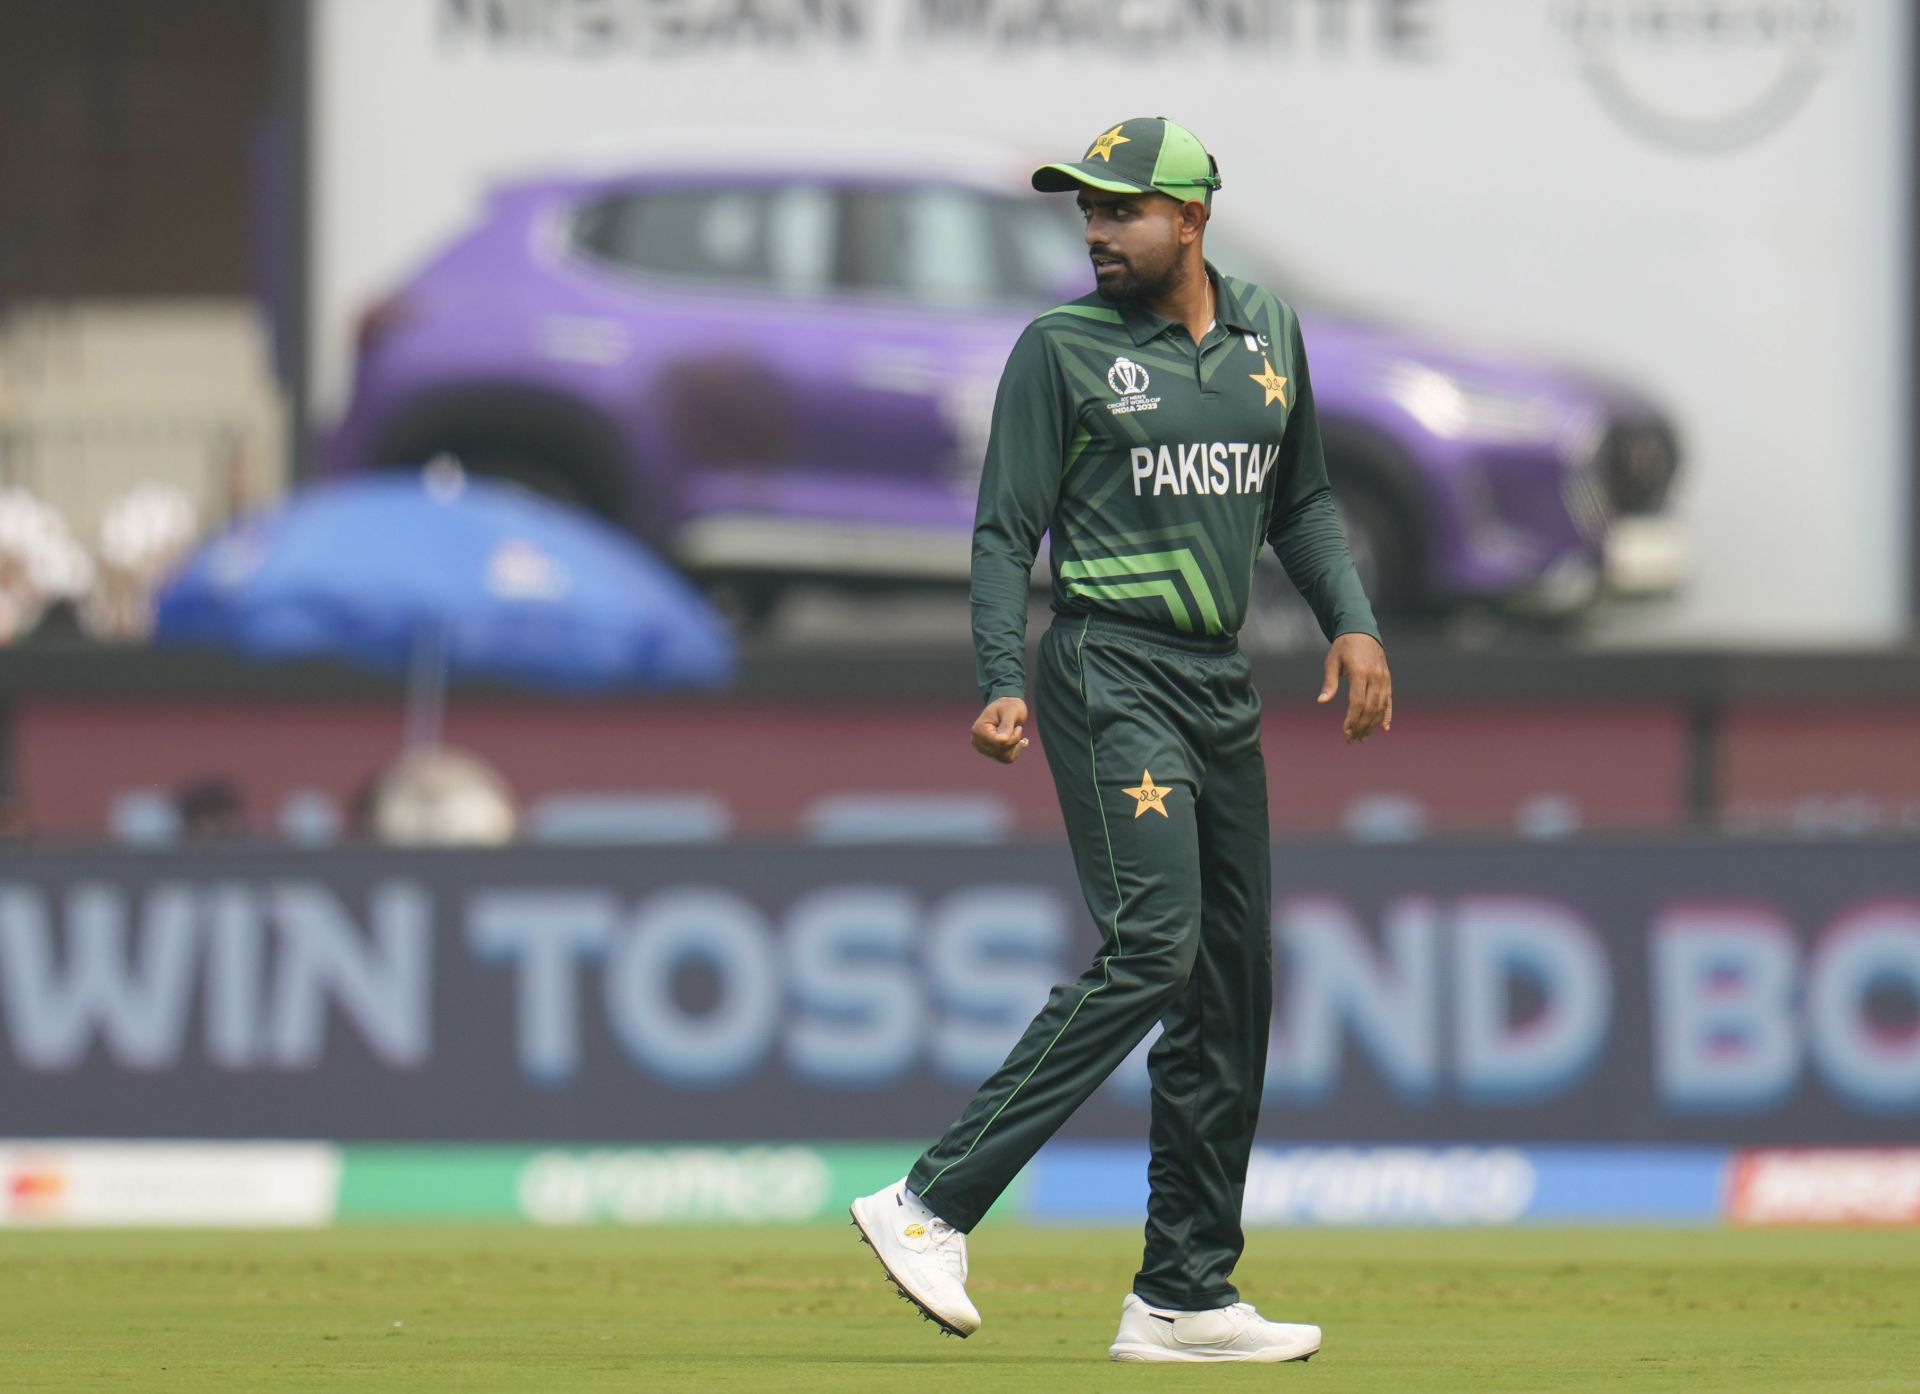 Pakistan captain Babar Azam leaves after the coin toss during the match against India. (Pic: AP)